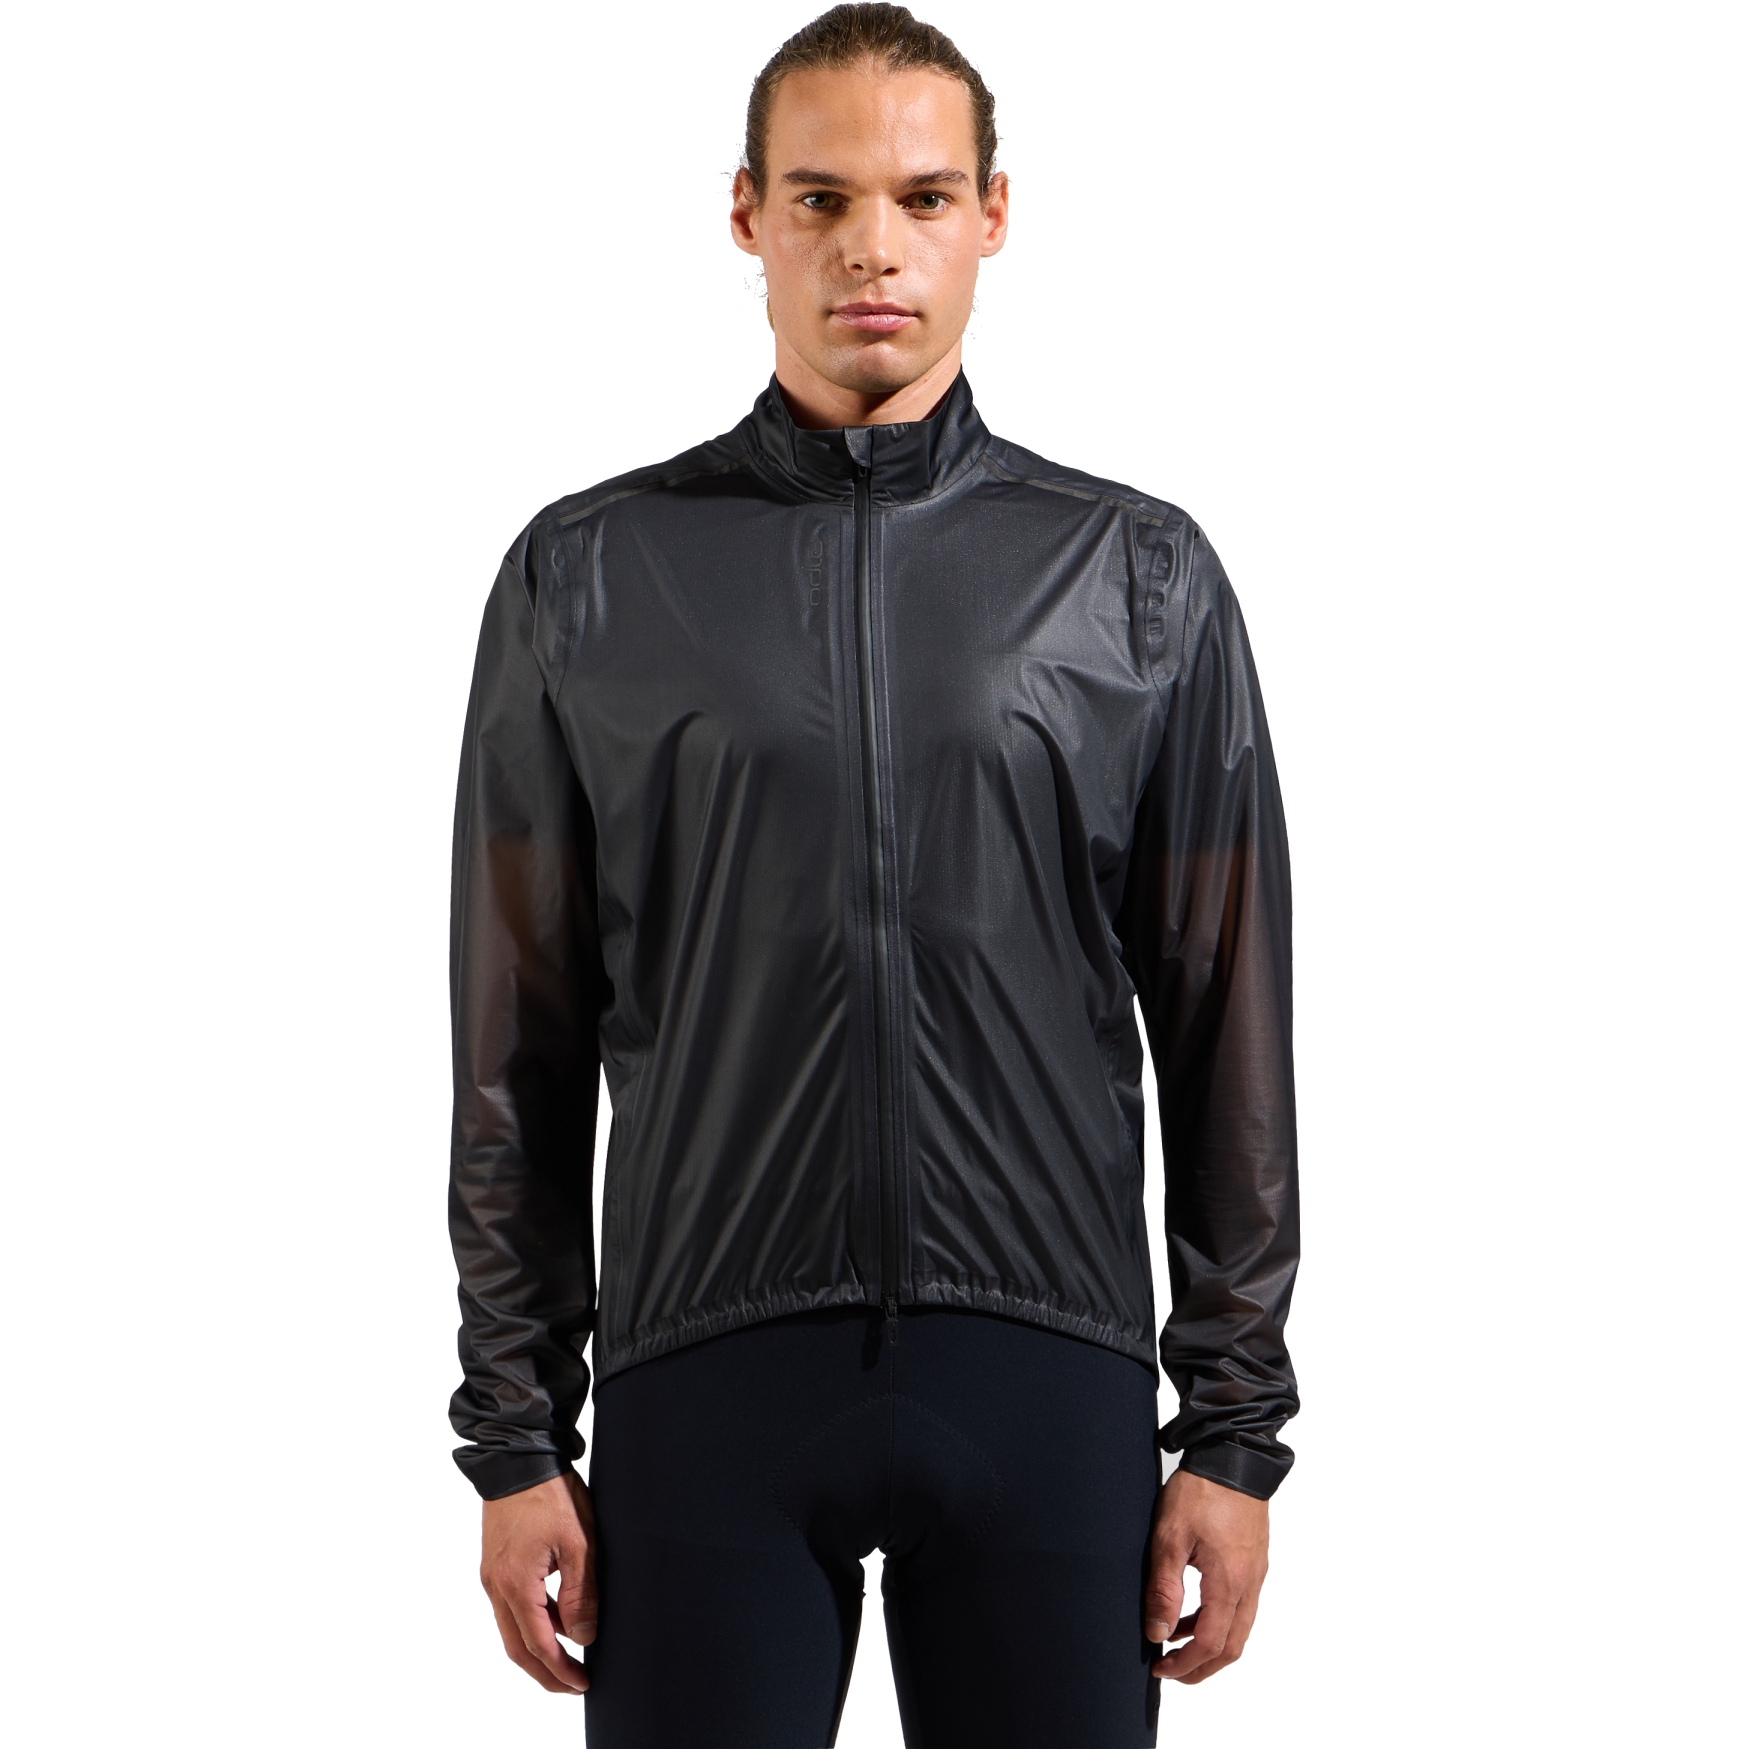 Picture of Odlo Zeroweight Dual Dry Performance Knit Waterproof Cycling Jacket Men - black